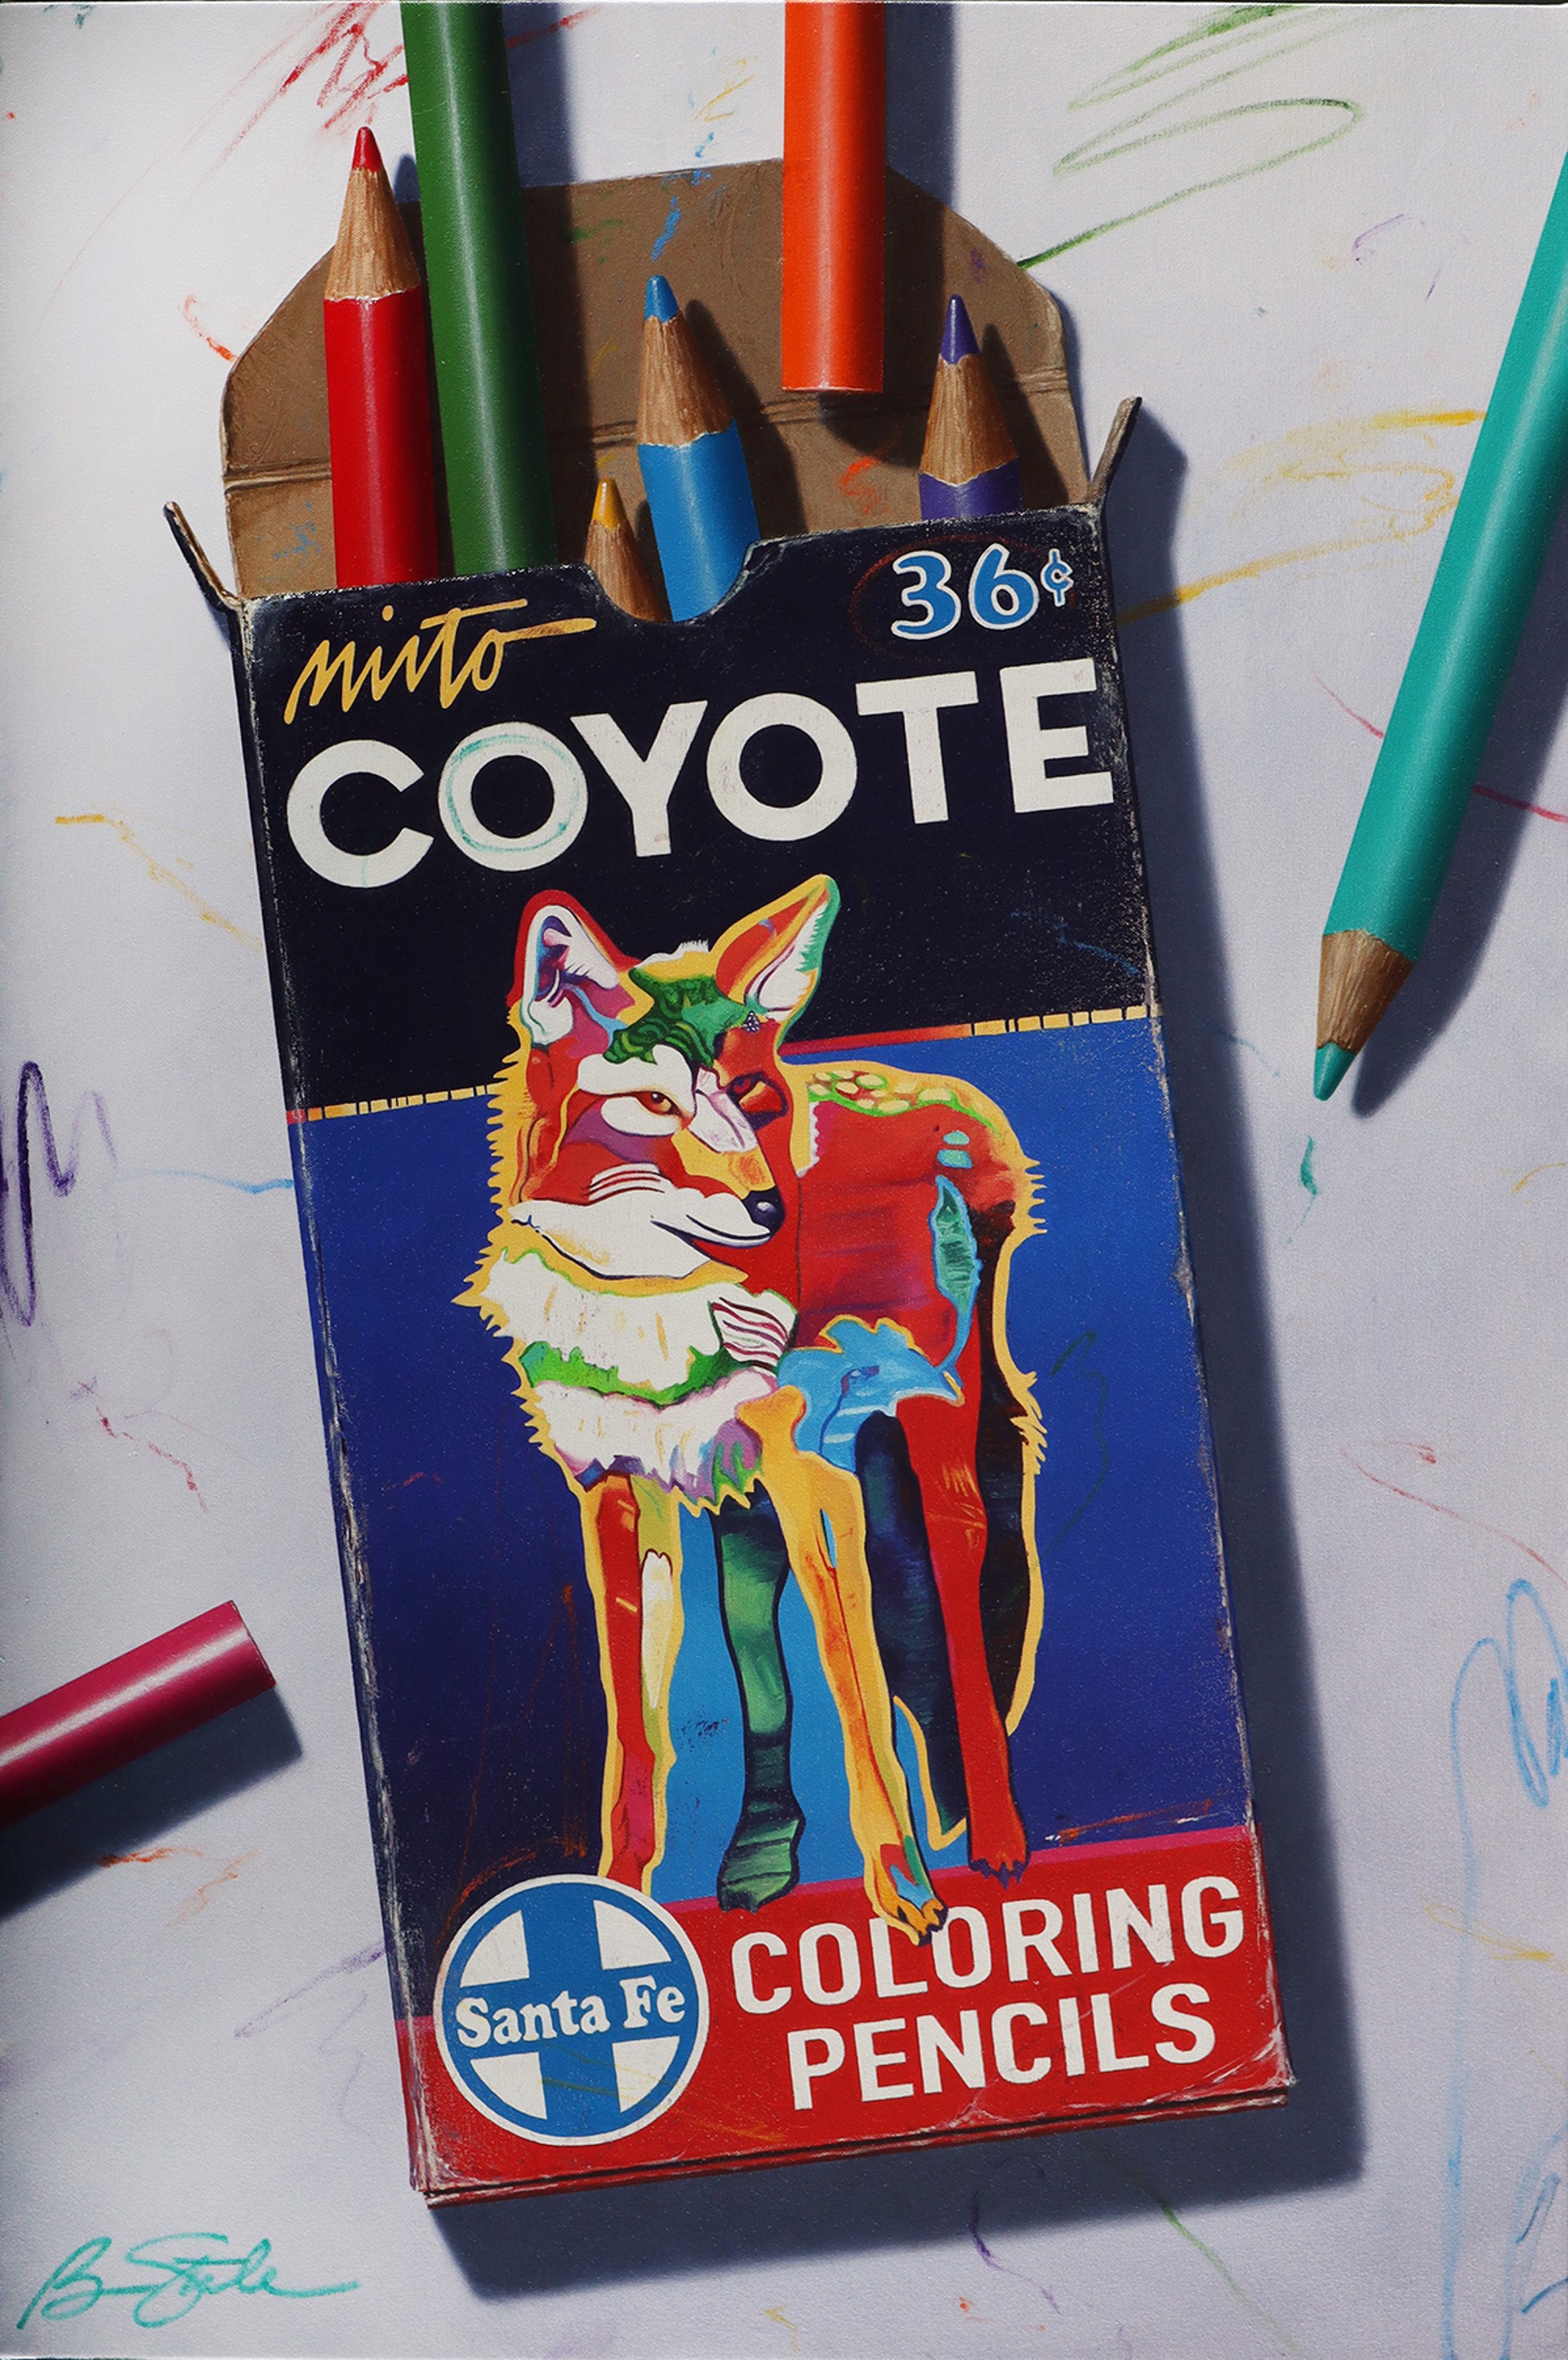 Coyote Coloring Pencils by Ben Steele